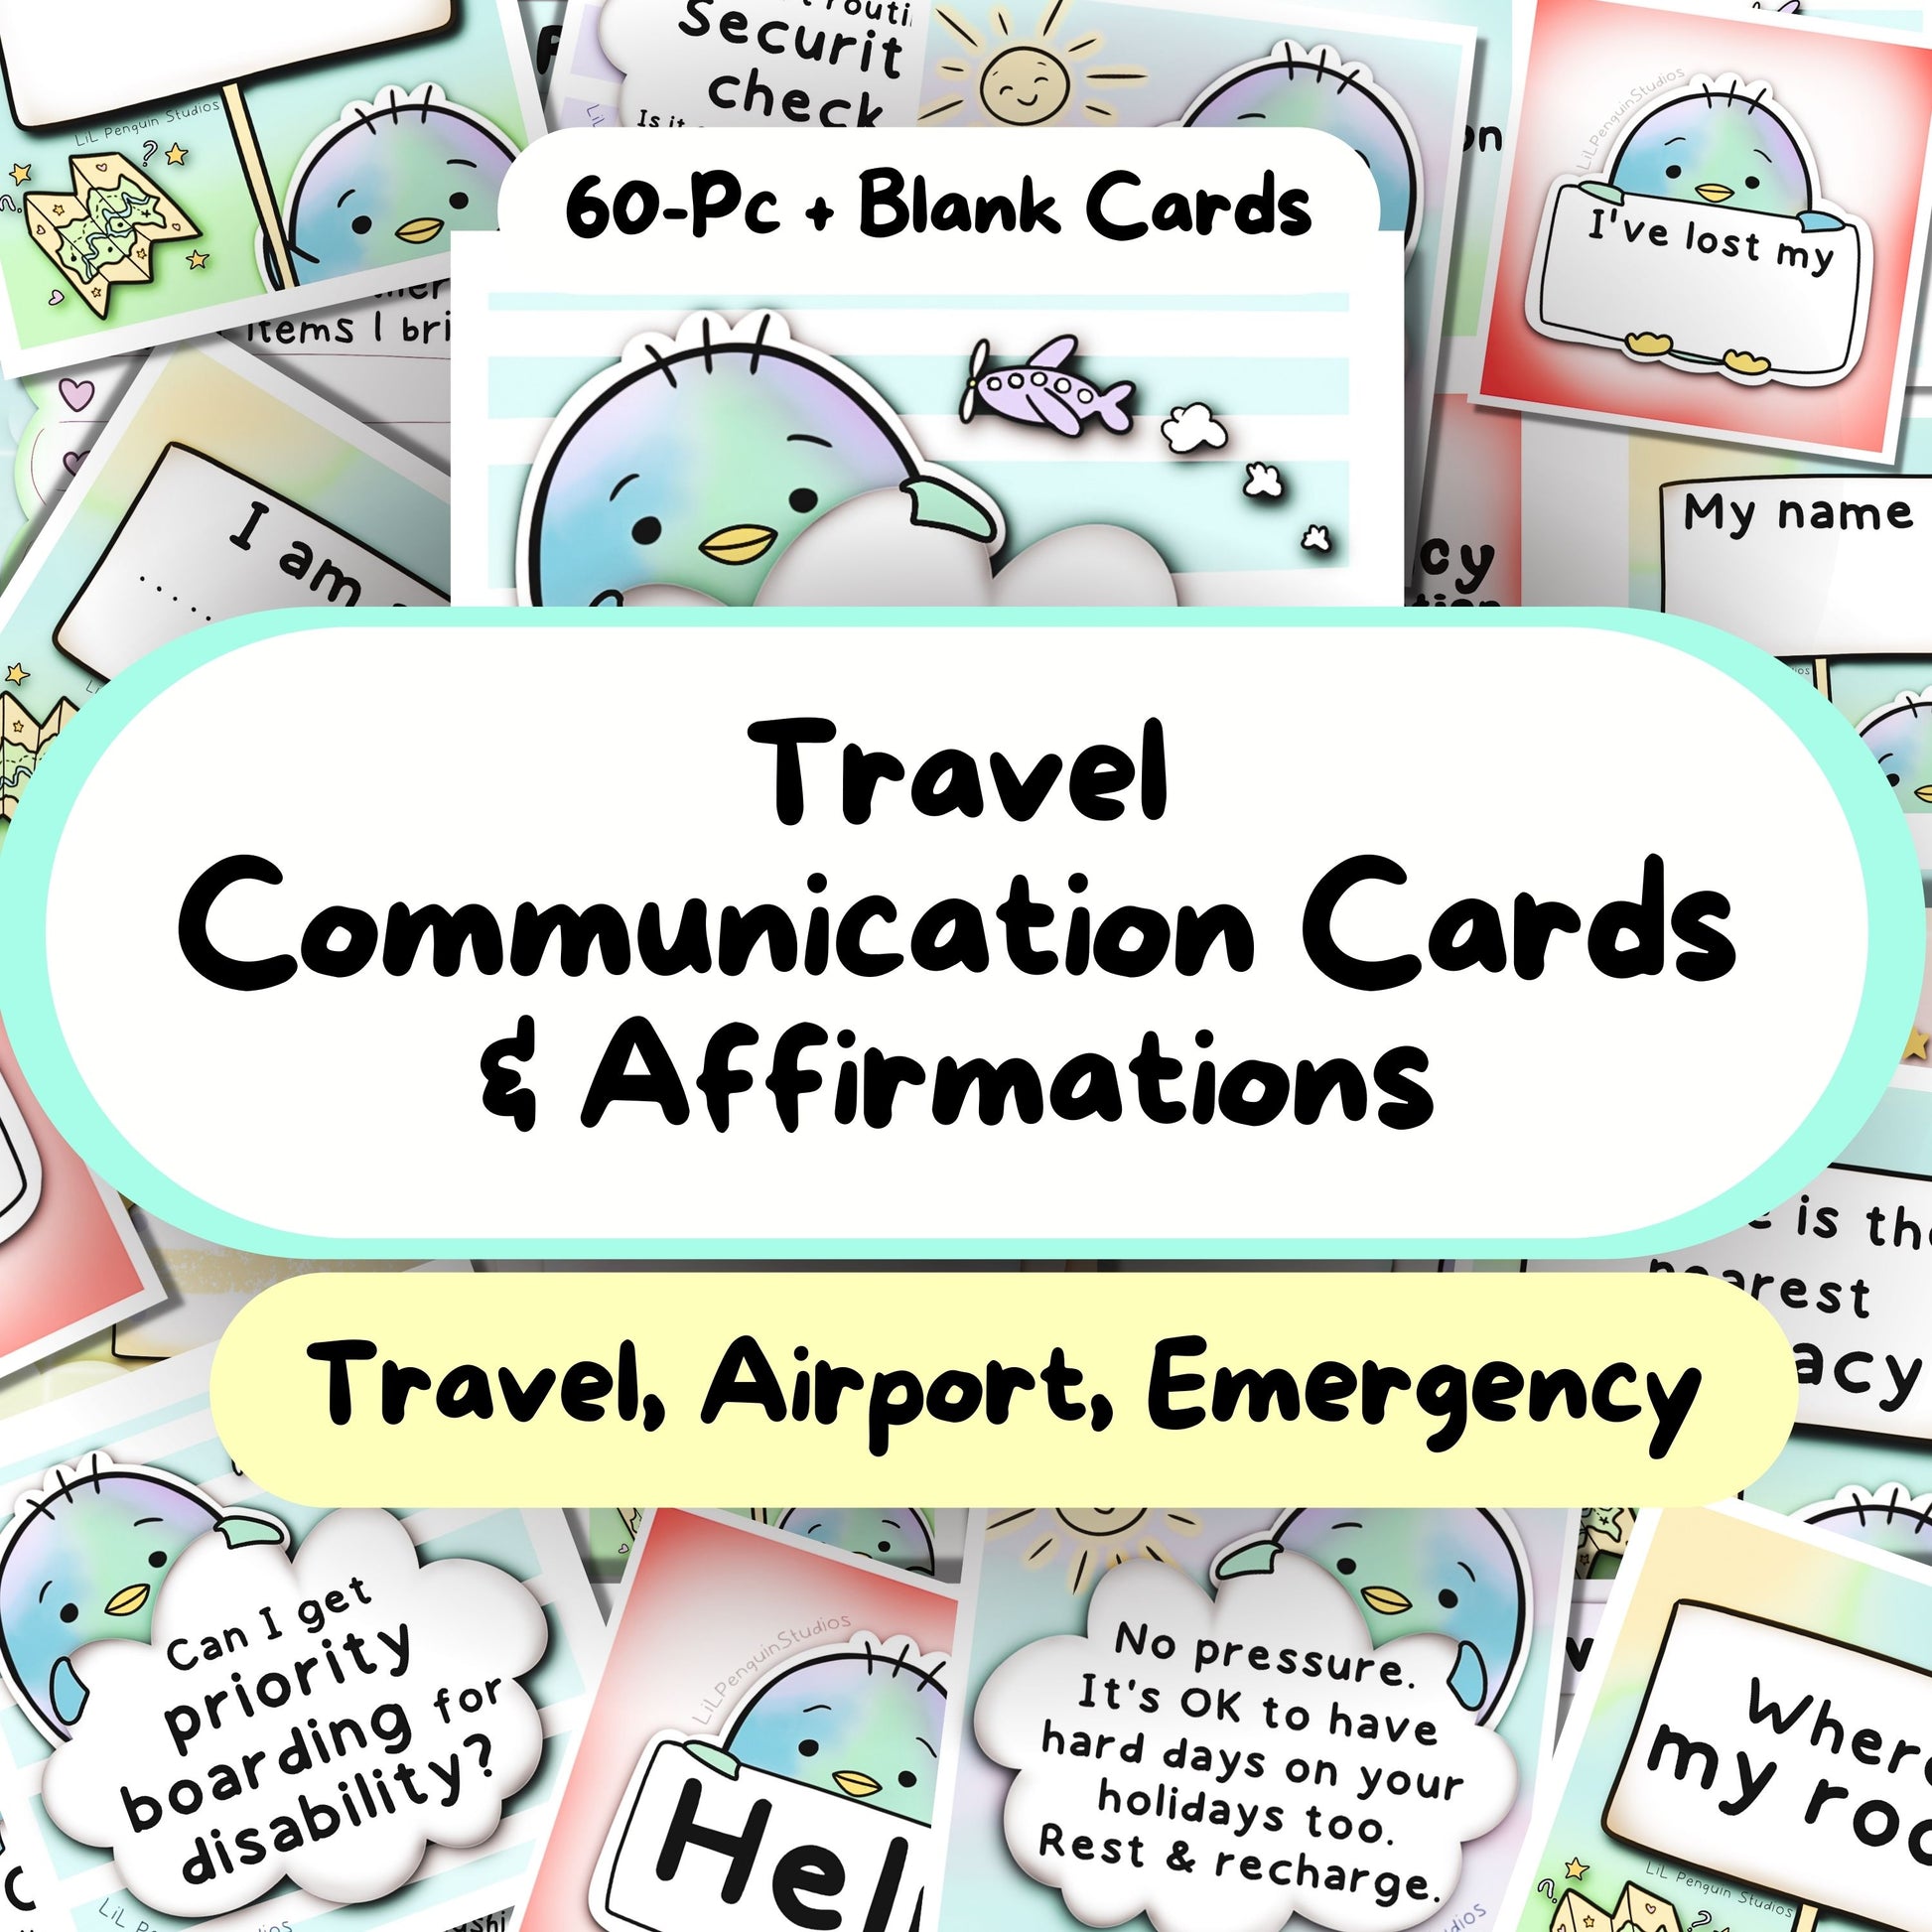 Autism travel affirmation and communication cards hand drawn by an autistic artist (airport, emergency and more travel communication cards as well as some routine affirmation cards for traveling